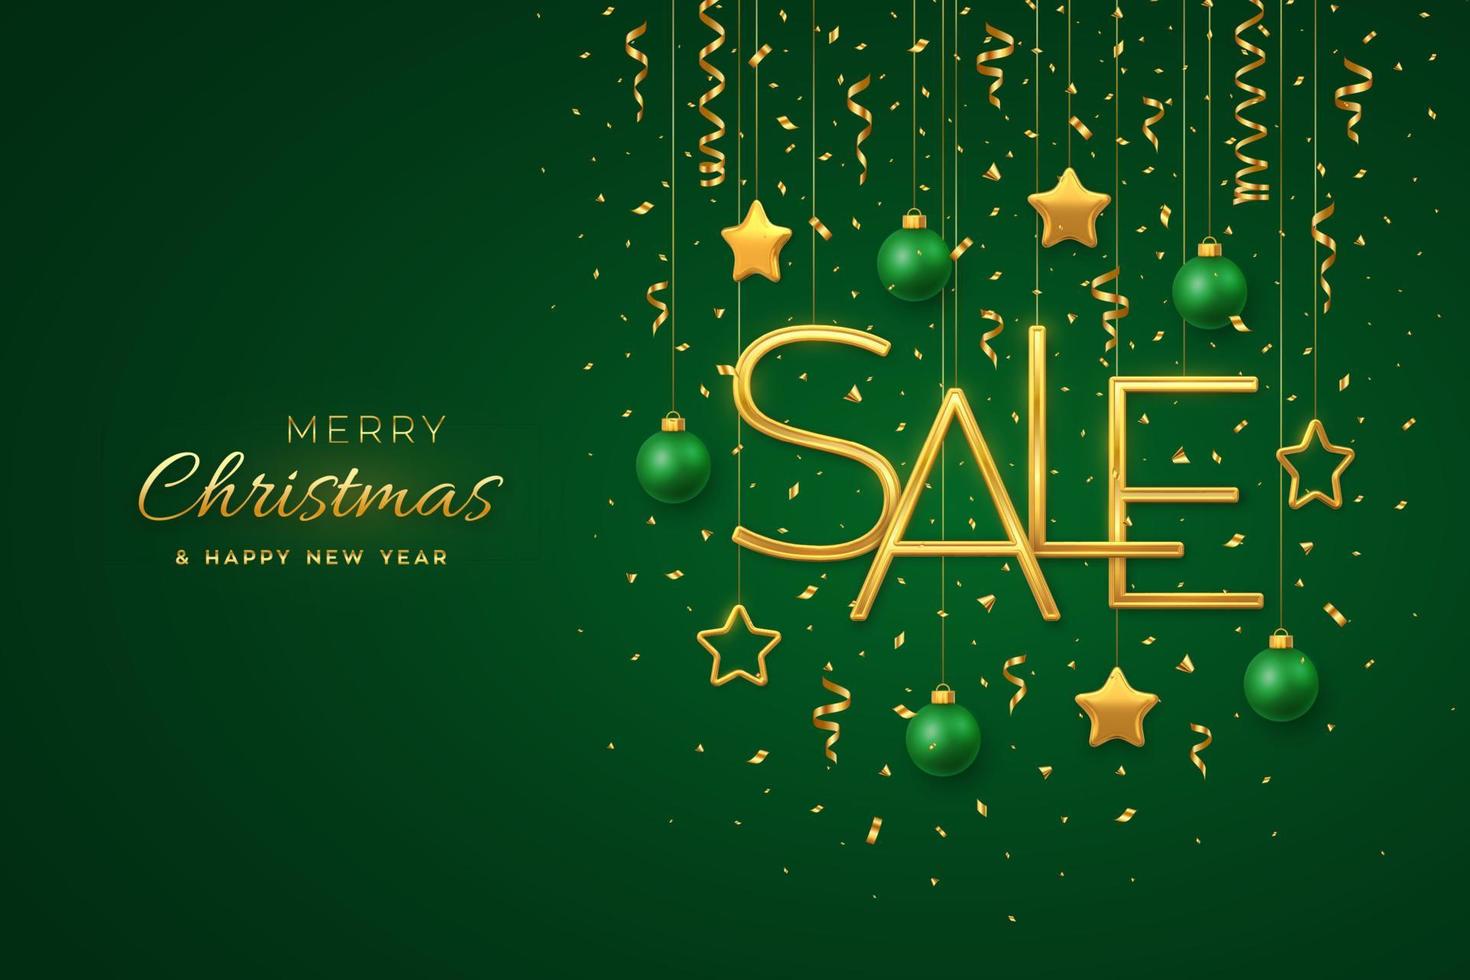 Christmas sale design banner template. Hanging Golden metallic Sale letters with 3D metallic stars, balls and confetti on green background. Advertising poster or flyer. Realistic vector illustration.